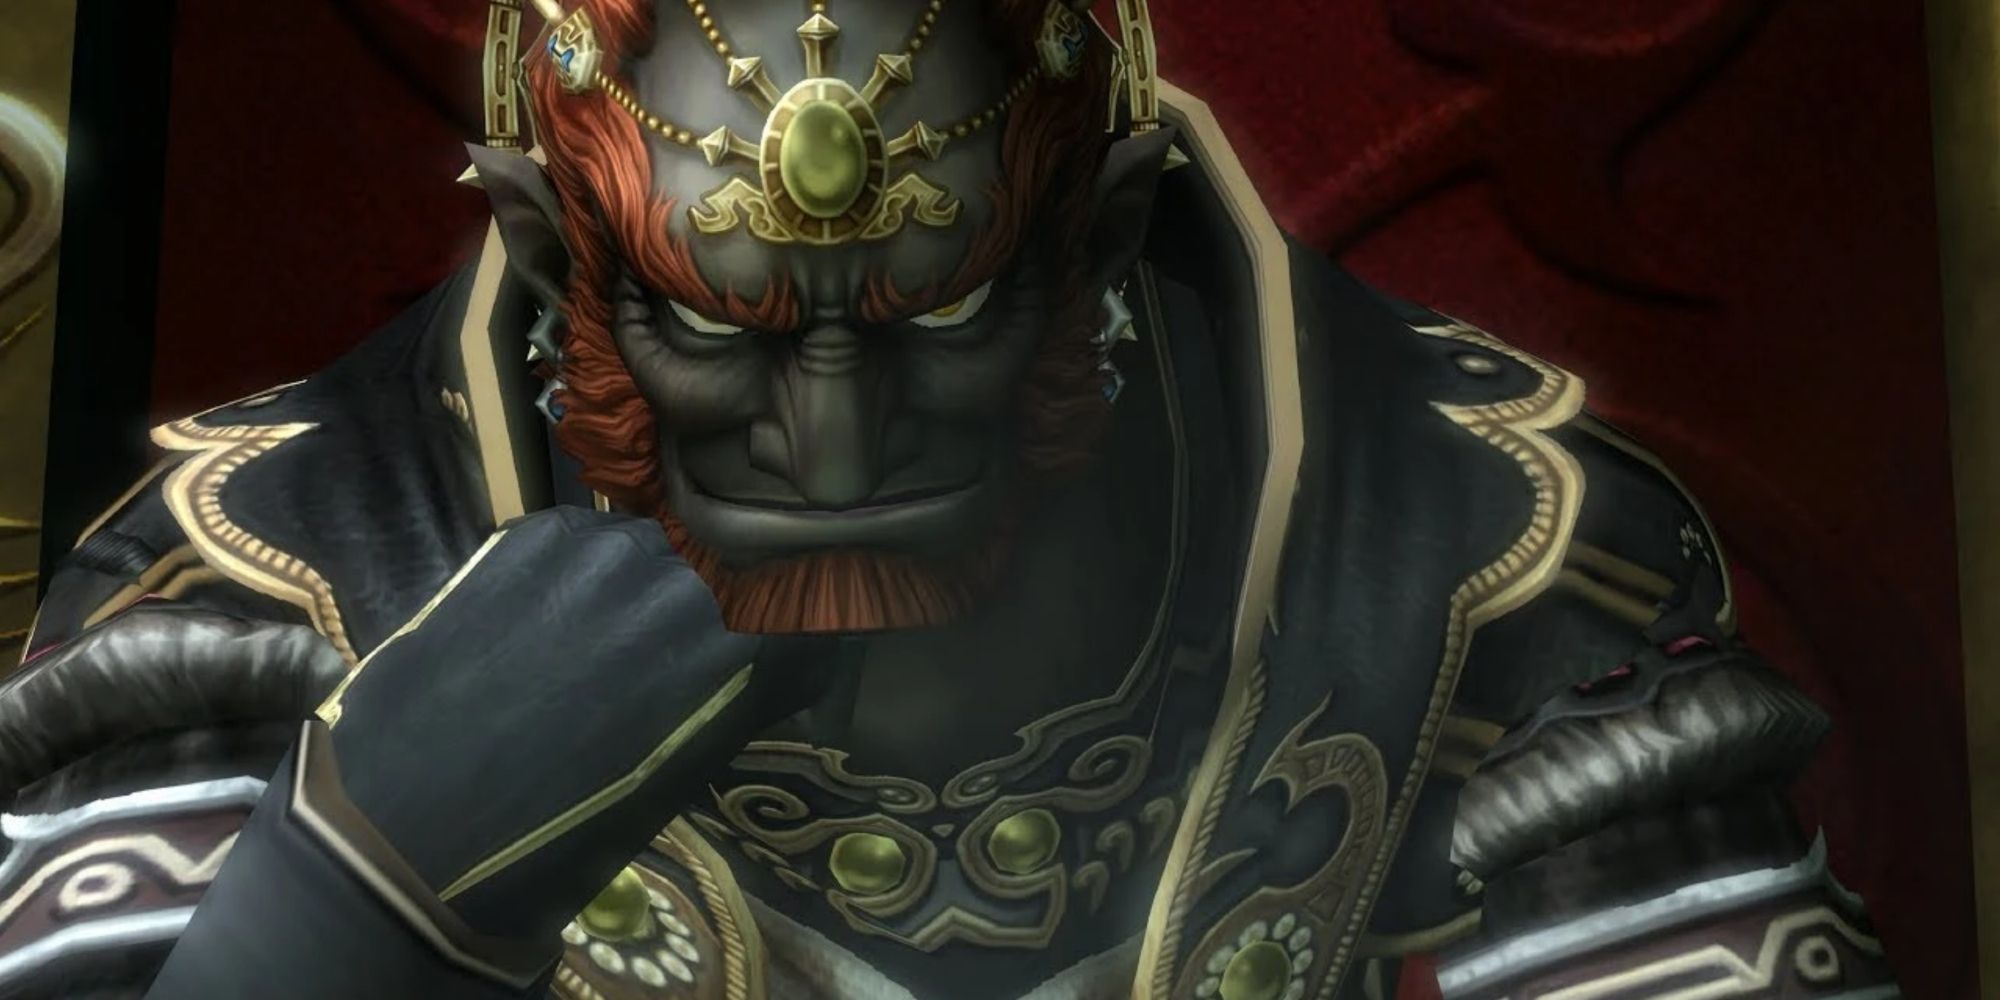 Ganondorf Sitting In A Throne With A Wicked Grin